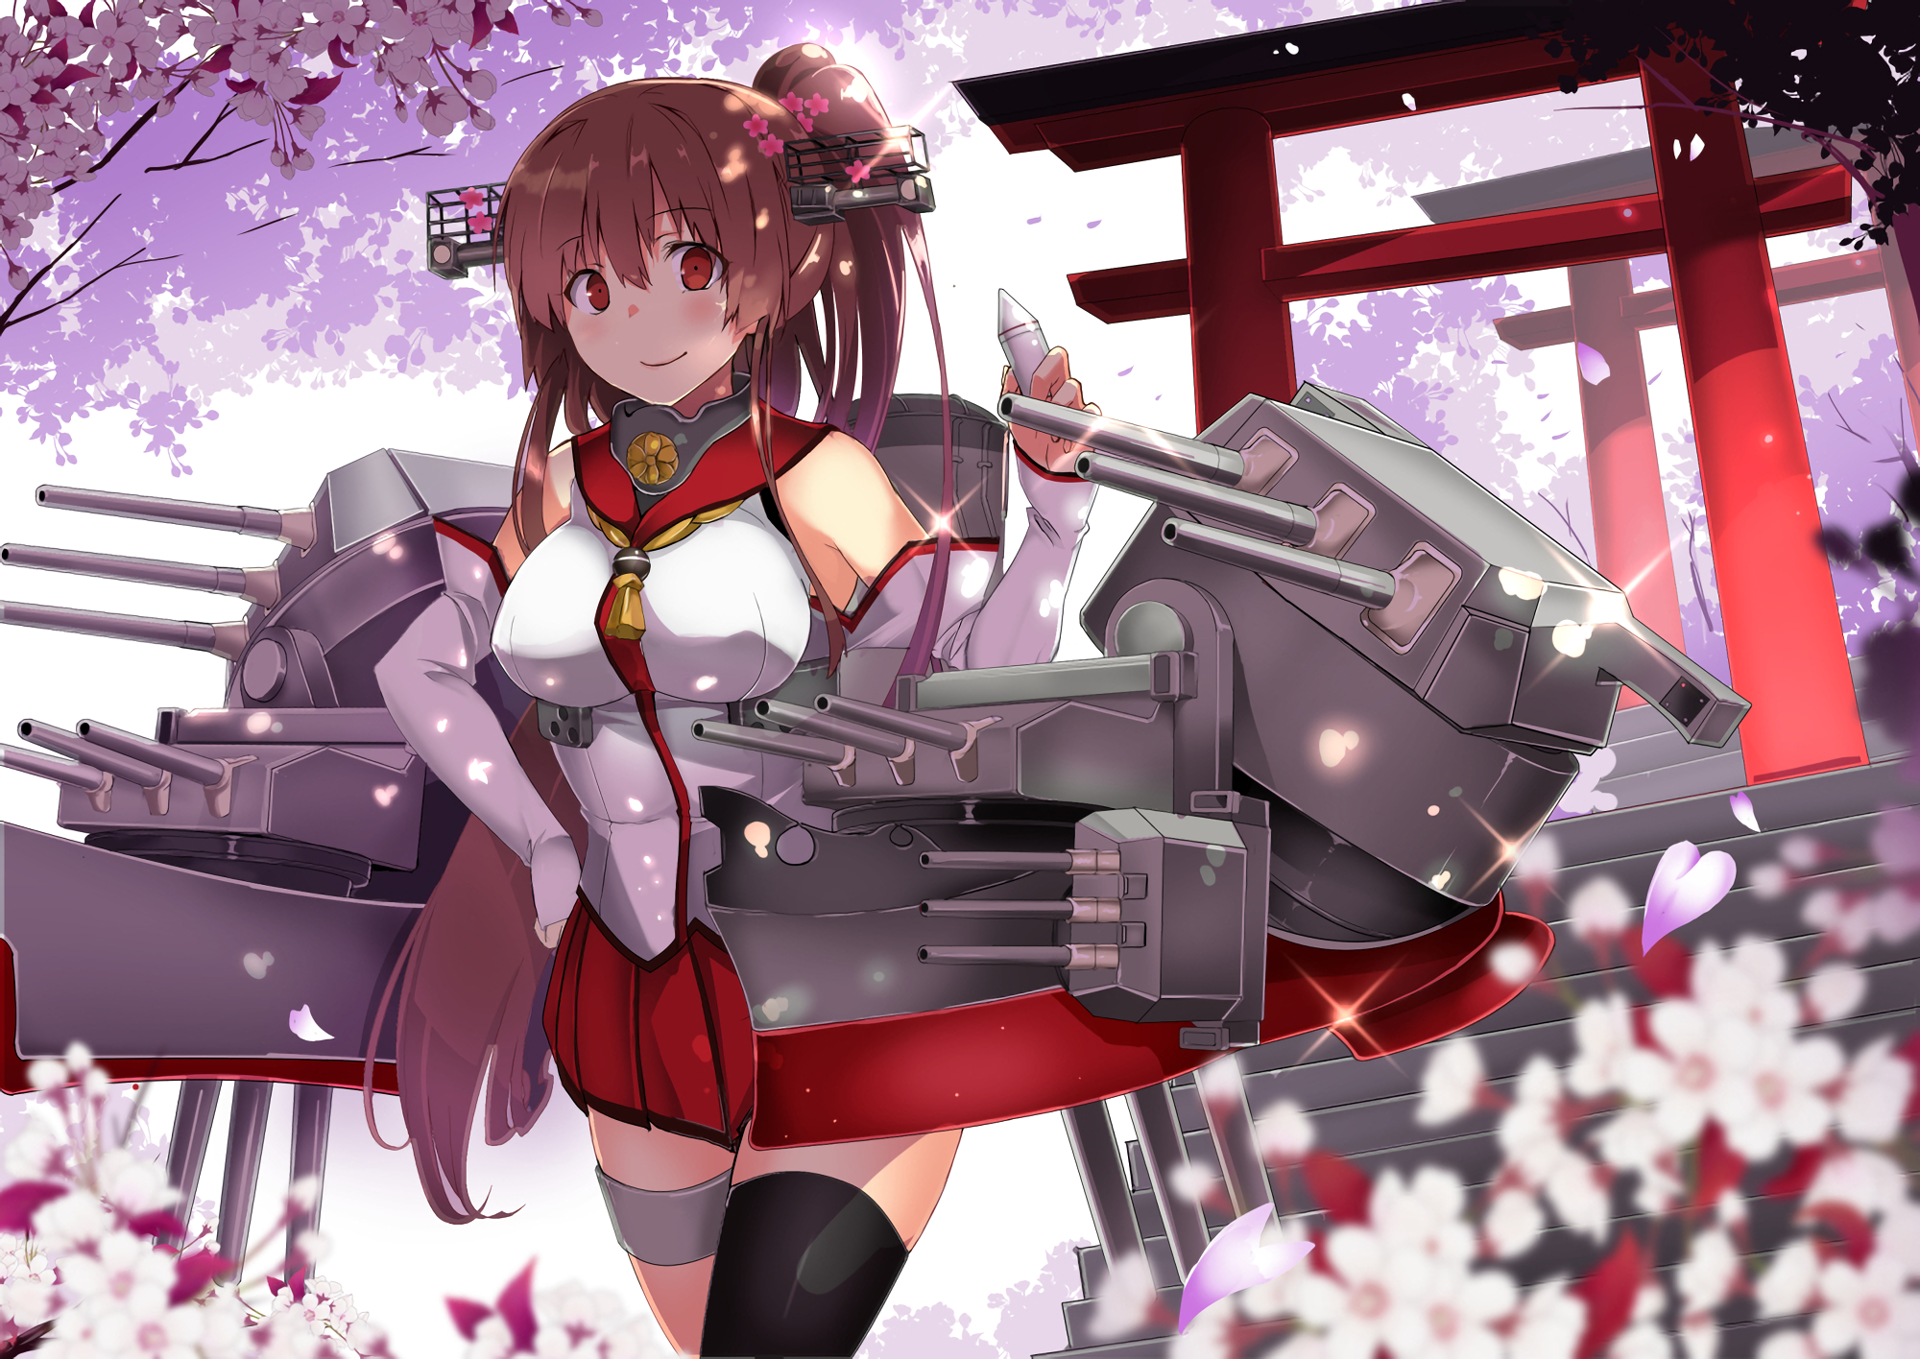 Kancolle collection. Ямато КАНКОЛЛЕ. Ямато Кантай. Kantai collection Ямато. Kantai collection Yamato.